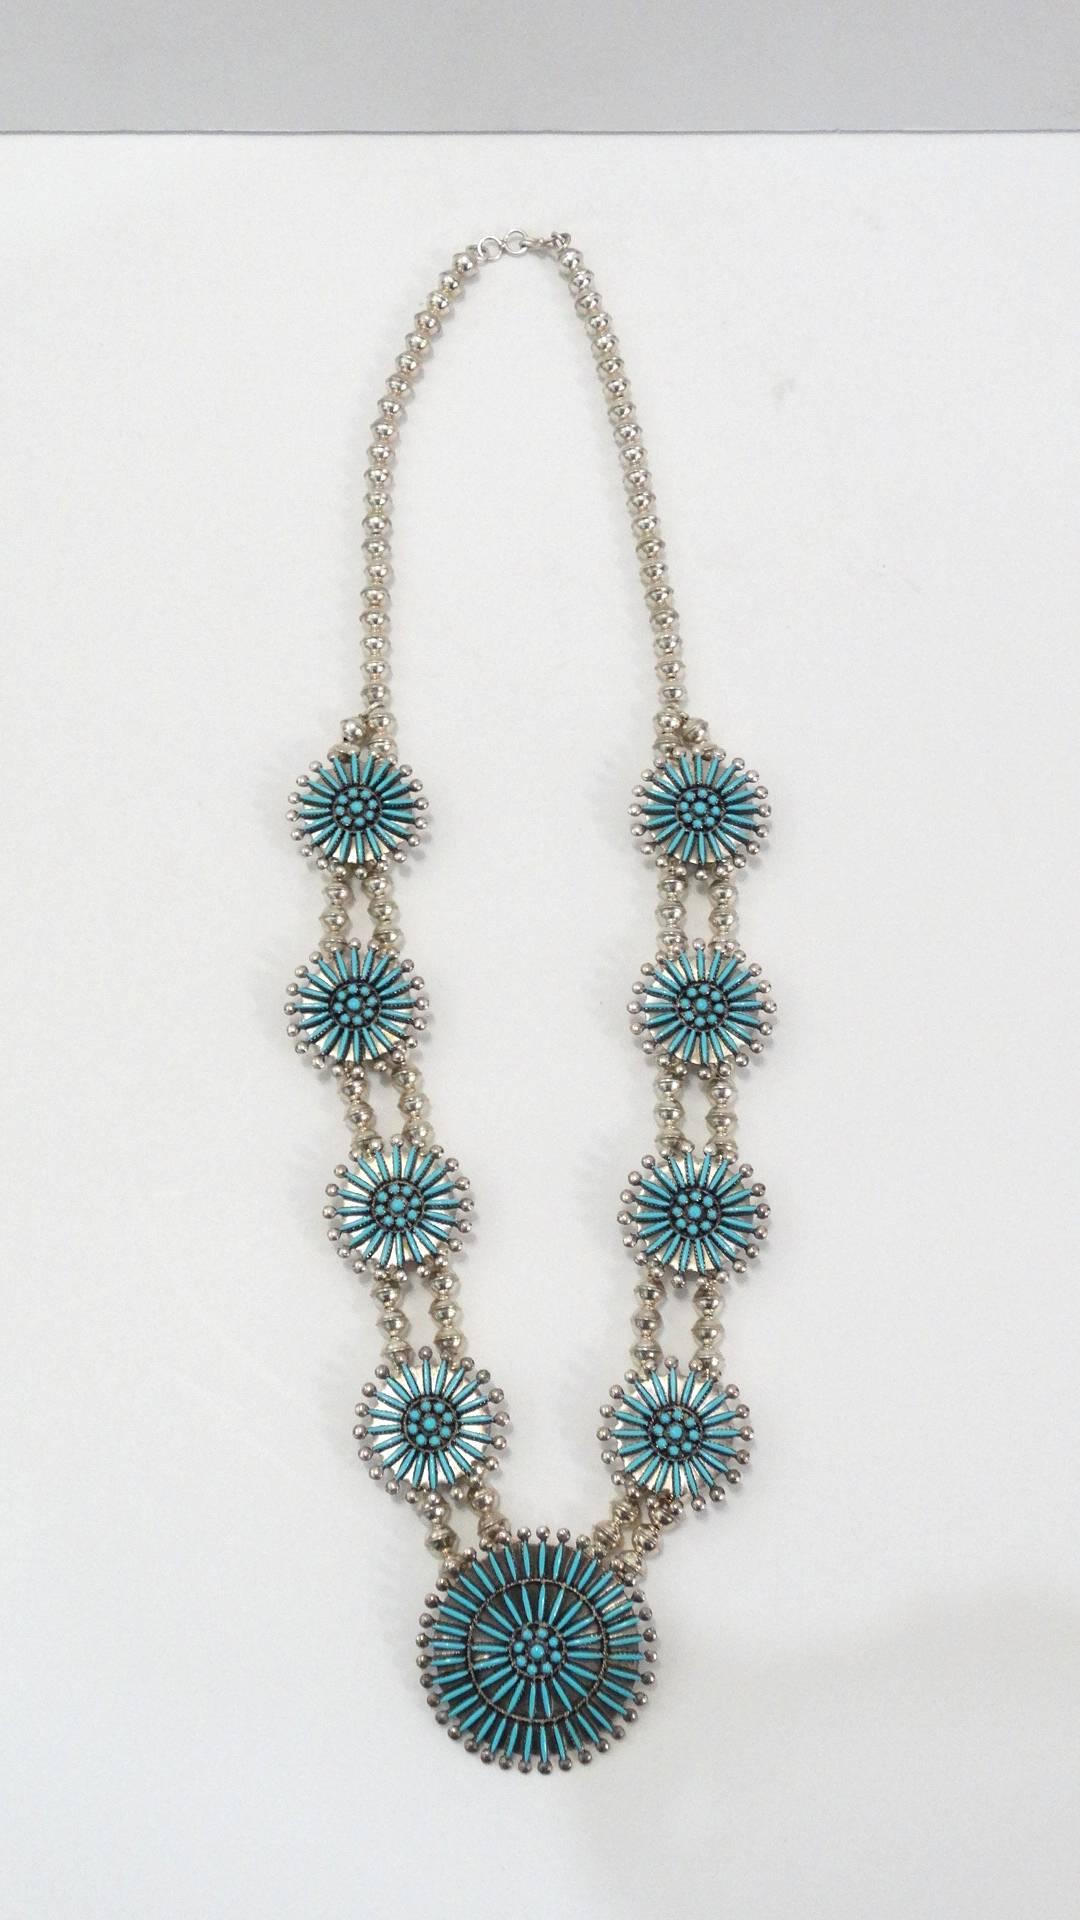 The most incredible squash blossom style necklace from the Zuni Native American tribe! Made of a quality sterling silver and inlayed with dozens of needle point cut turquoise stones, in intricate medallion patterns. Medallions strung through with